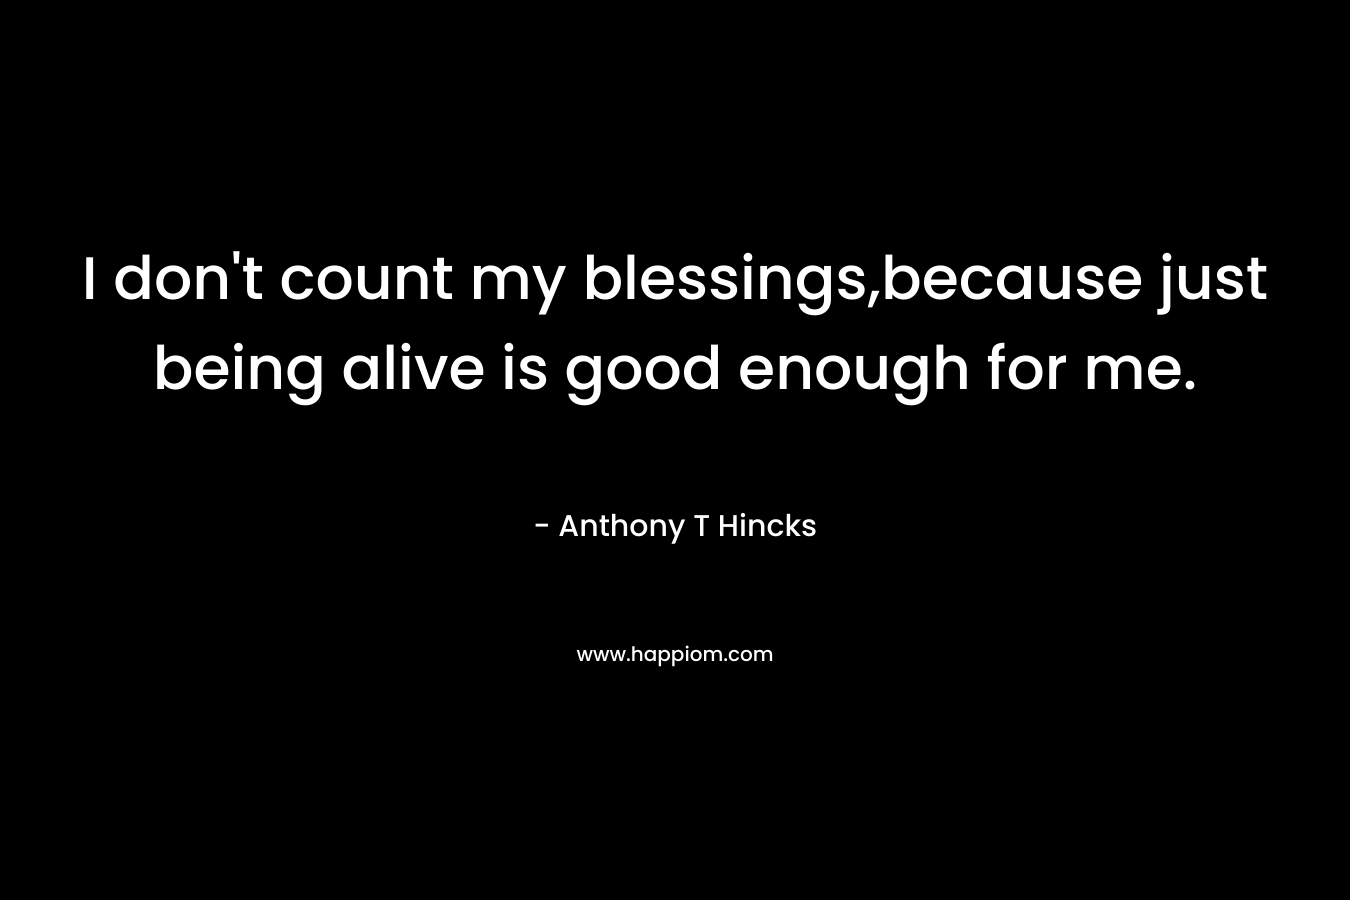 I don't count my blessings,because just being alive is good enough for me.